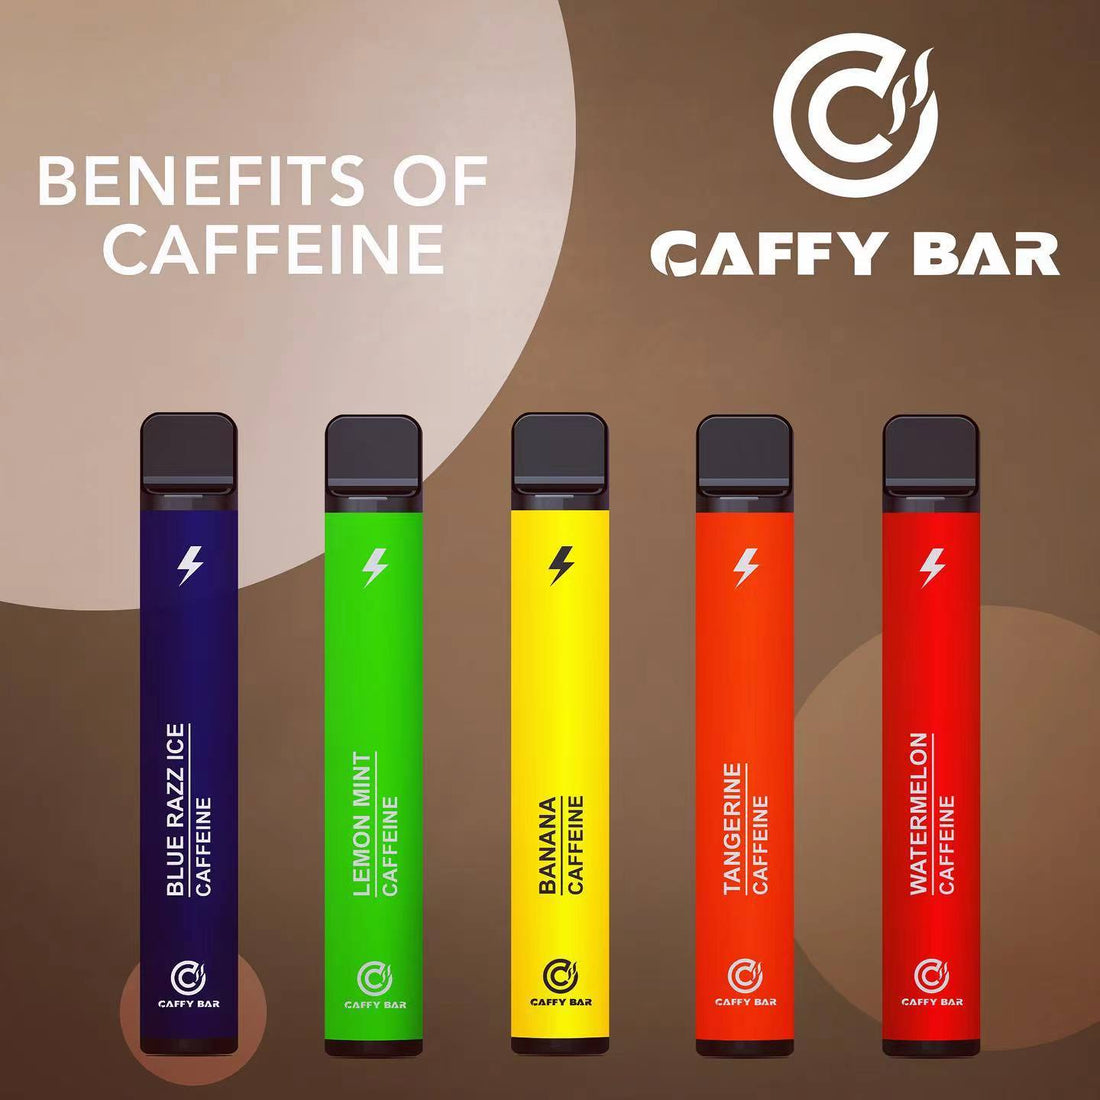 Who Can Benefit from Using the Caffy Bar caffeine smoke pen?